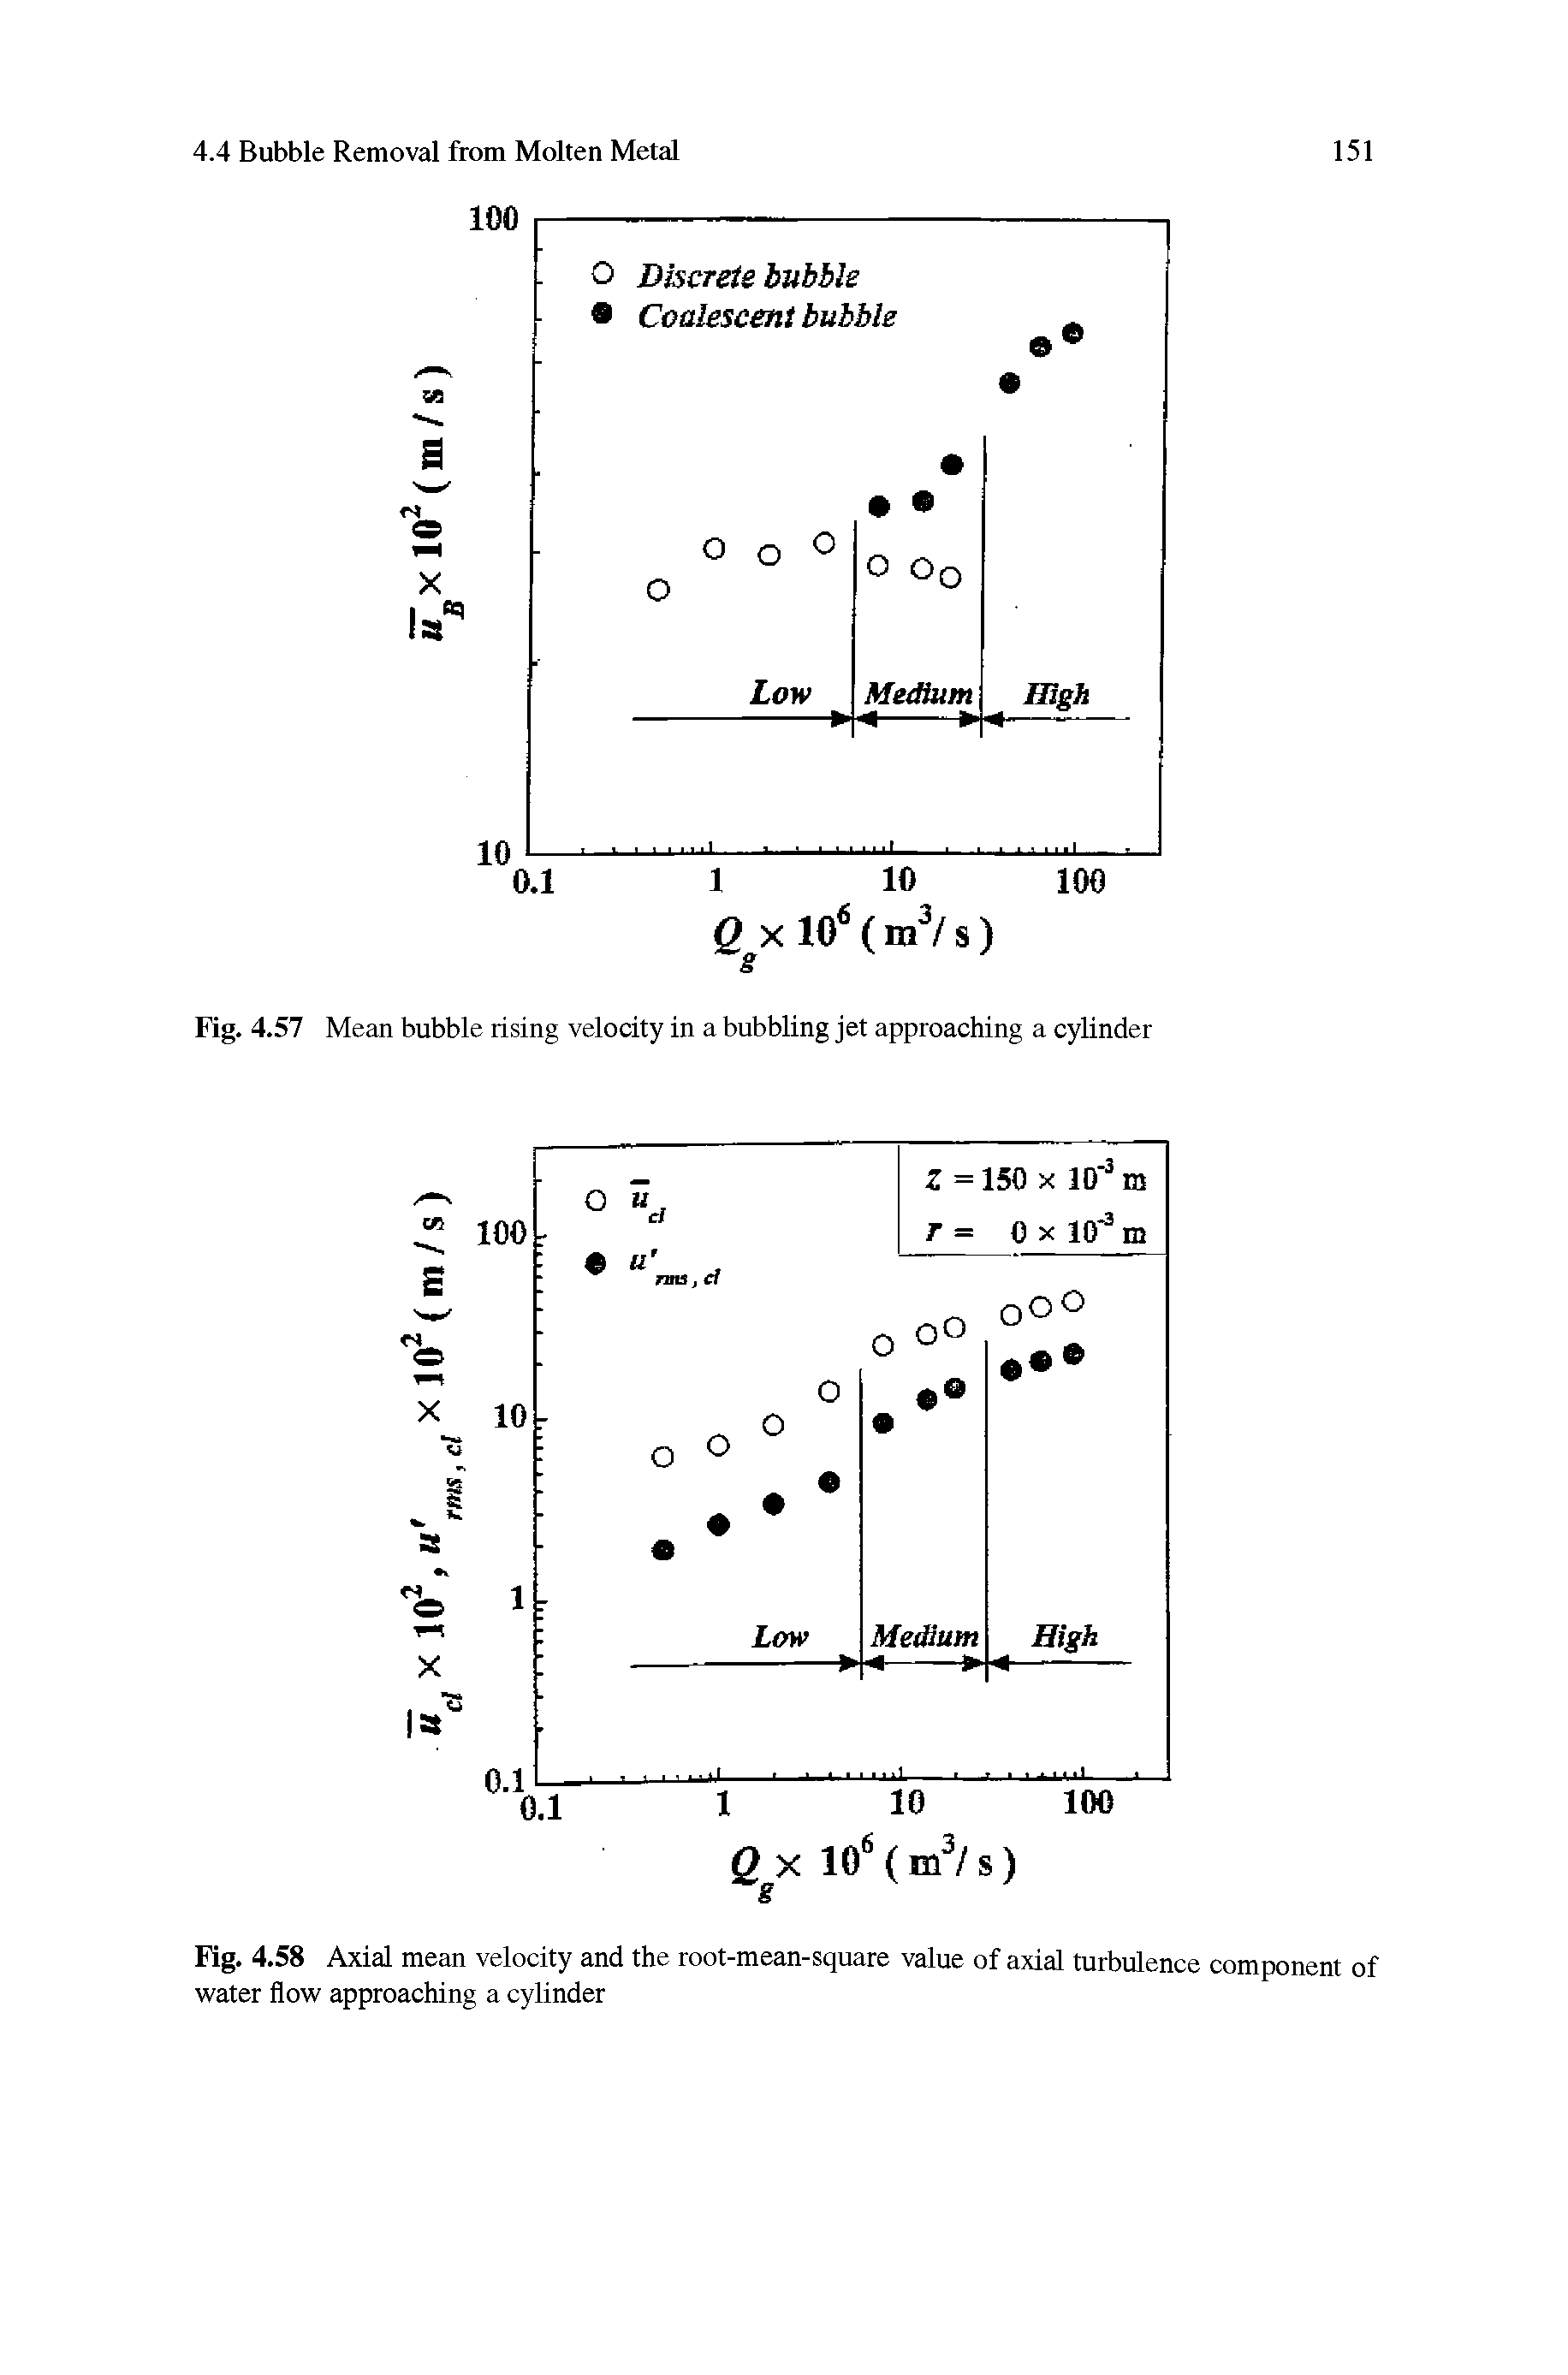 Fig. 4.58 Axial mean velocity and the root-mean-square value of axial turbulence component of water flow approaching a cylinder...